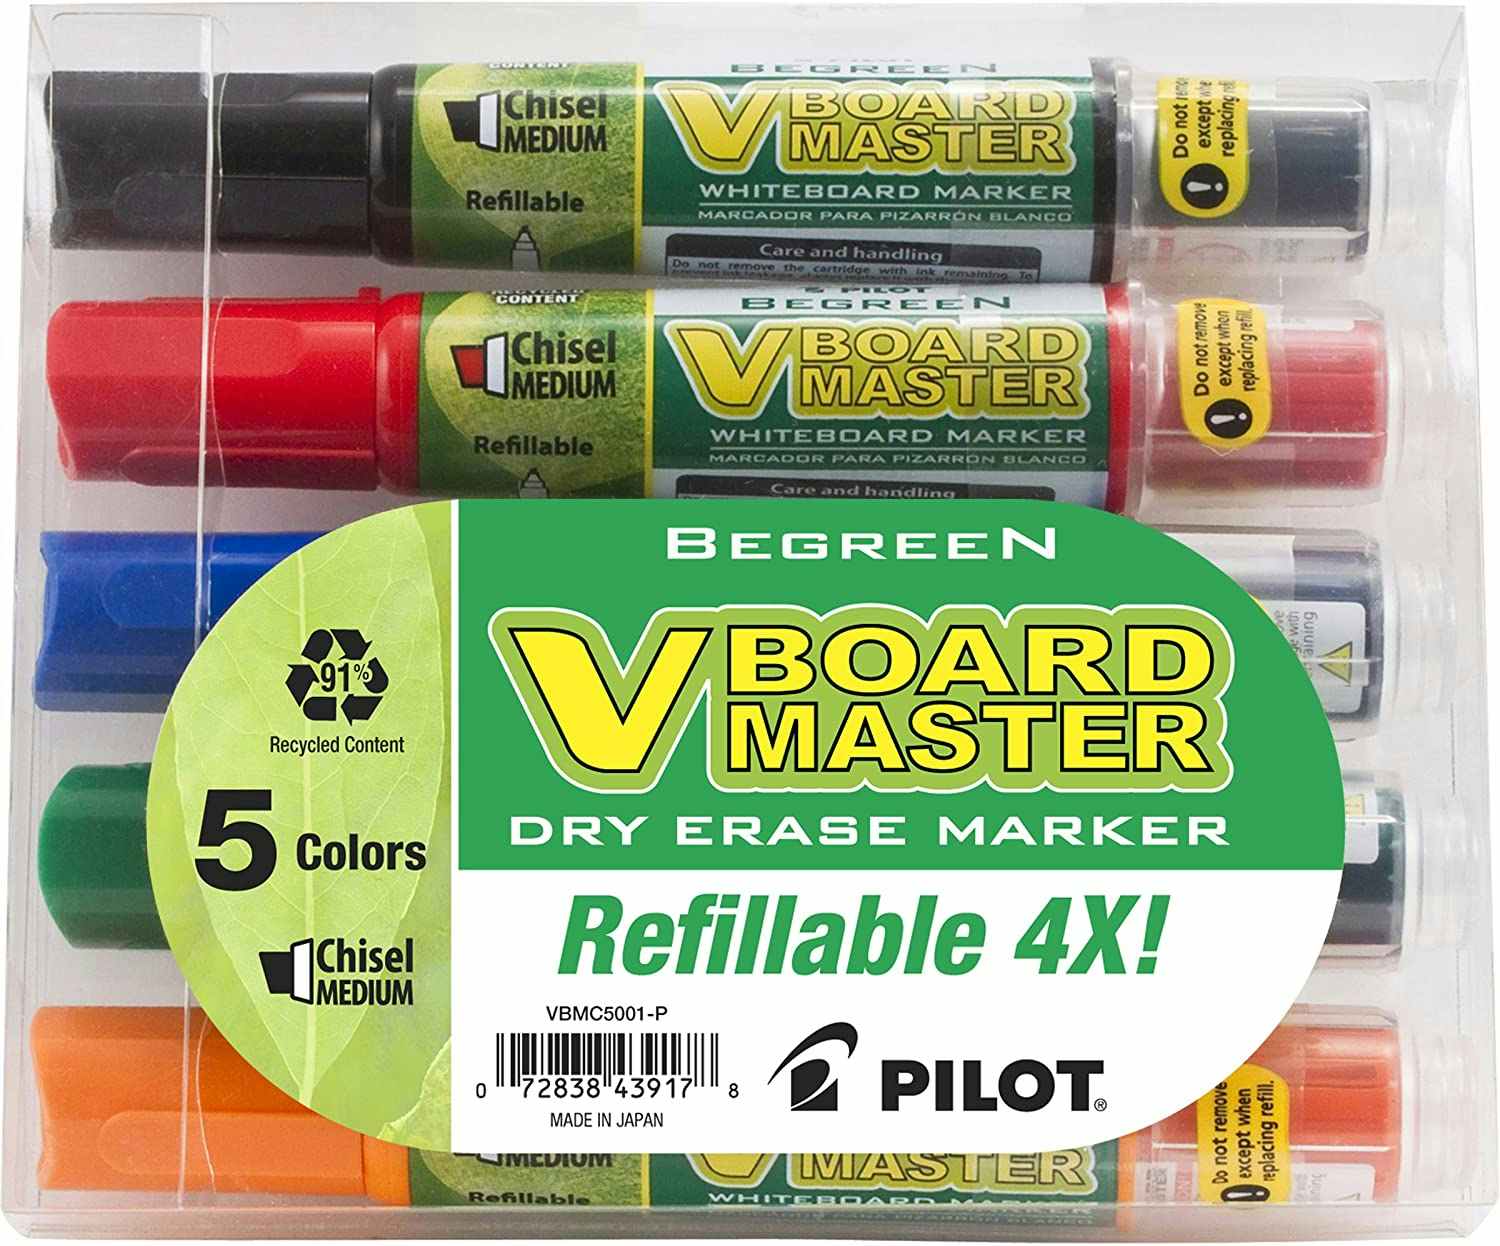 How To Fix Dried Out Water Based Markers - iFixit Repair Guide